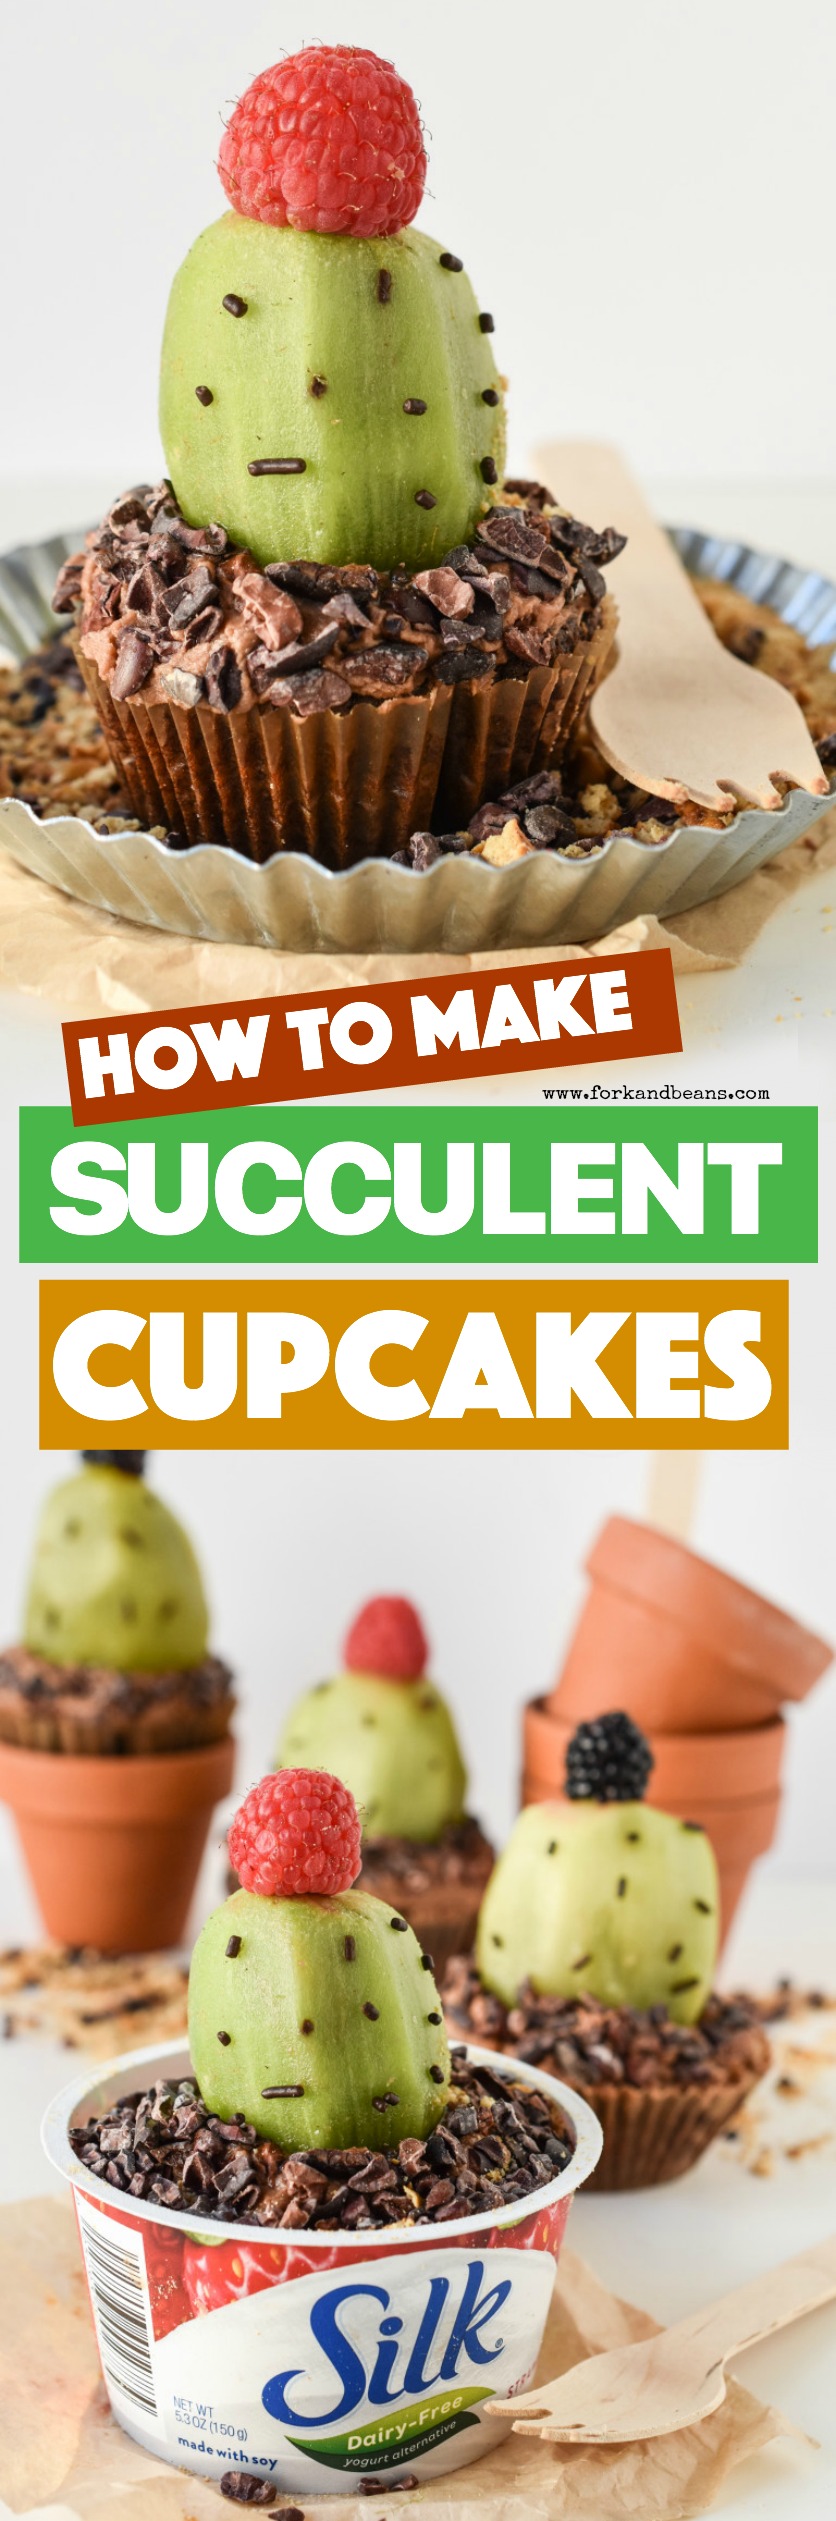 Plant your very own cactus this Earth Day with these adorable and eco-friendly gluten free Succulent Cupcakes!